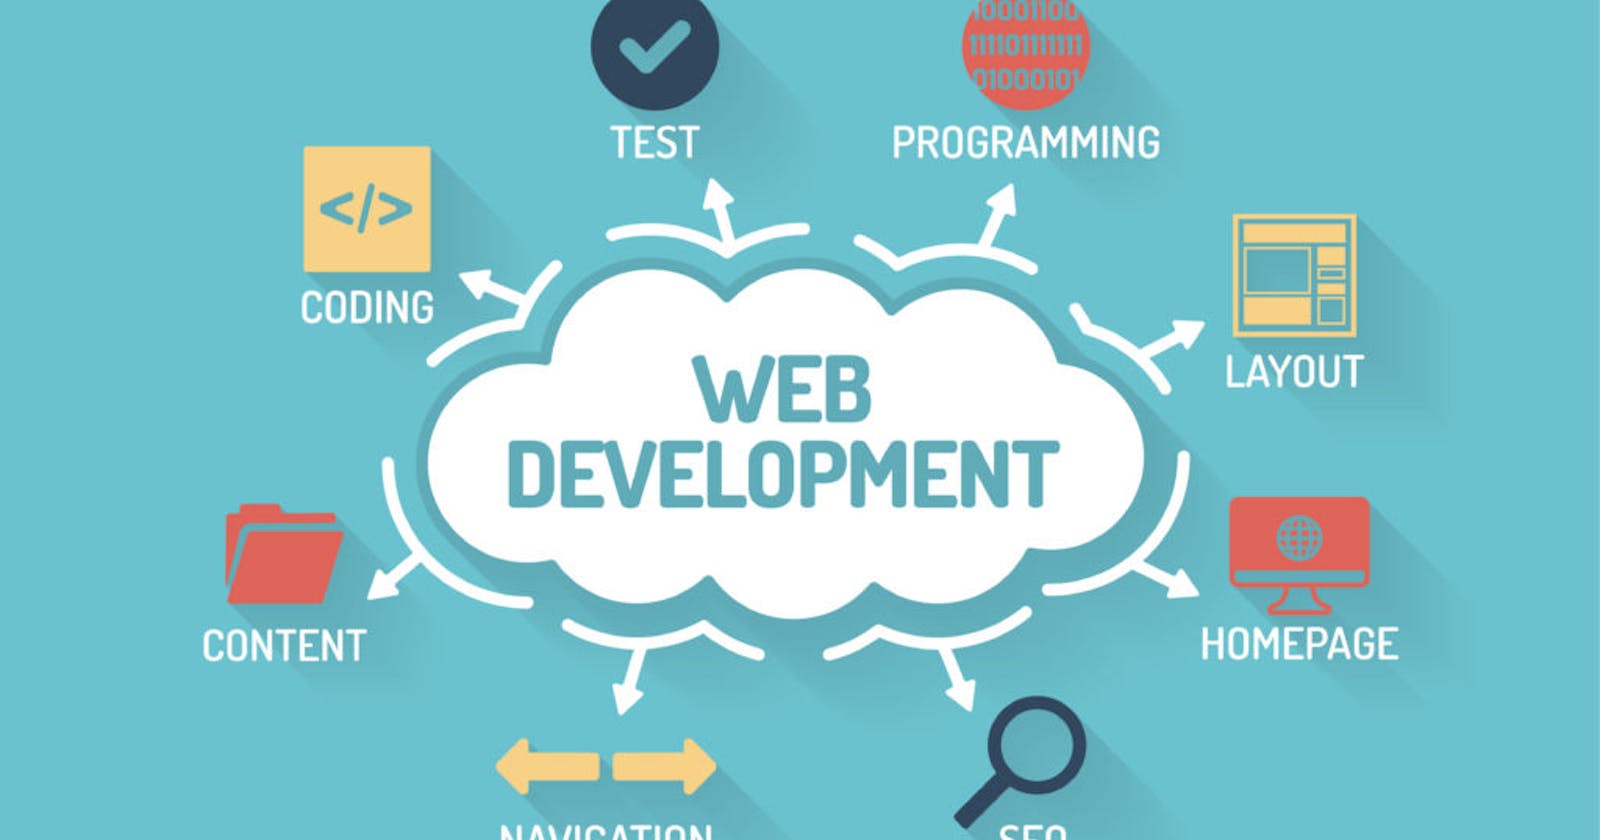 The ultimate guide to web development